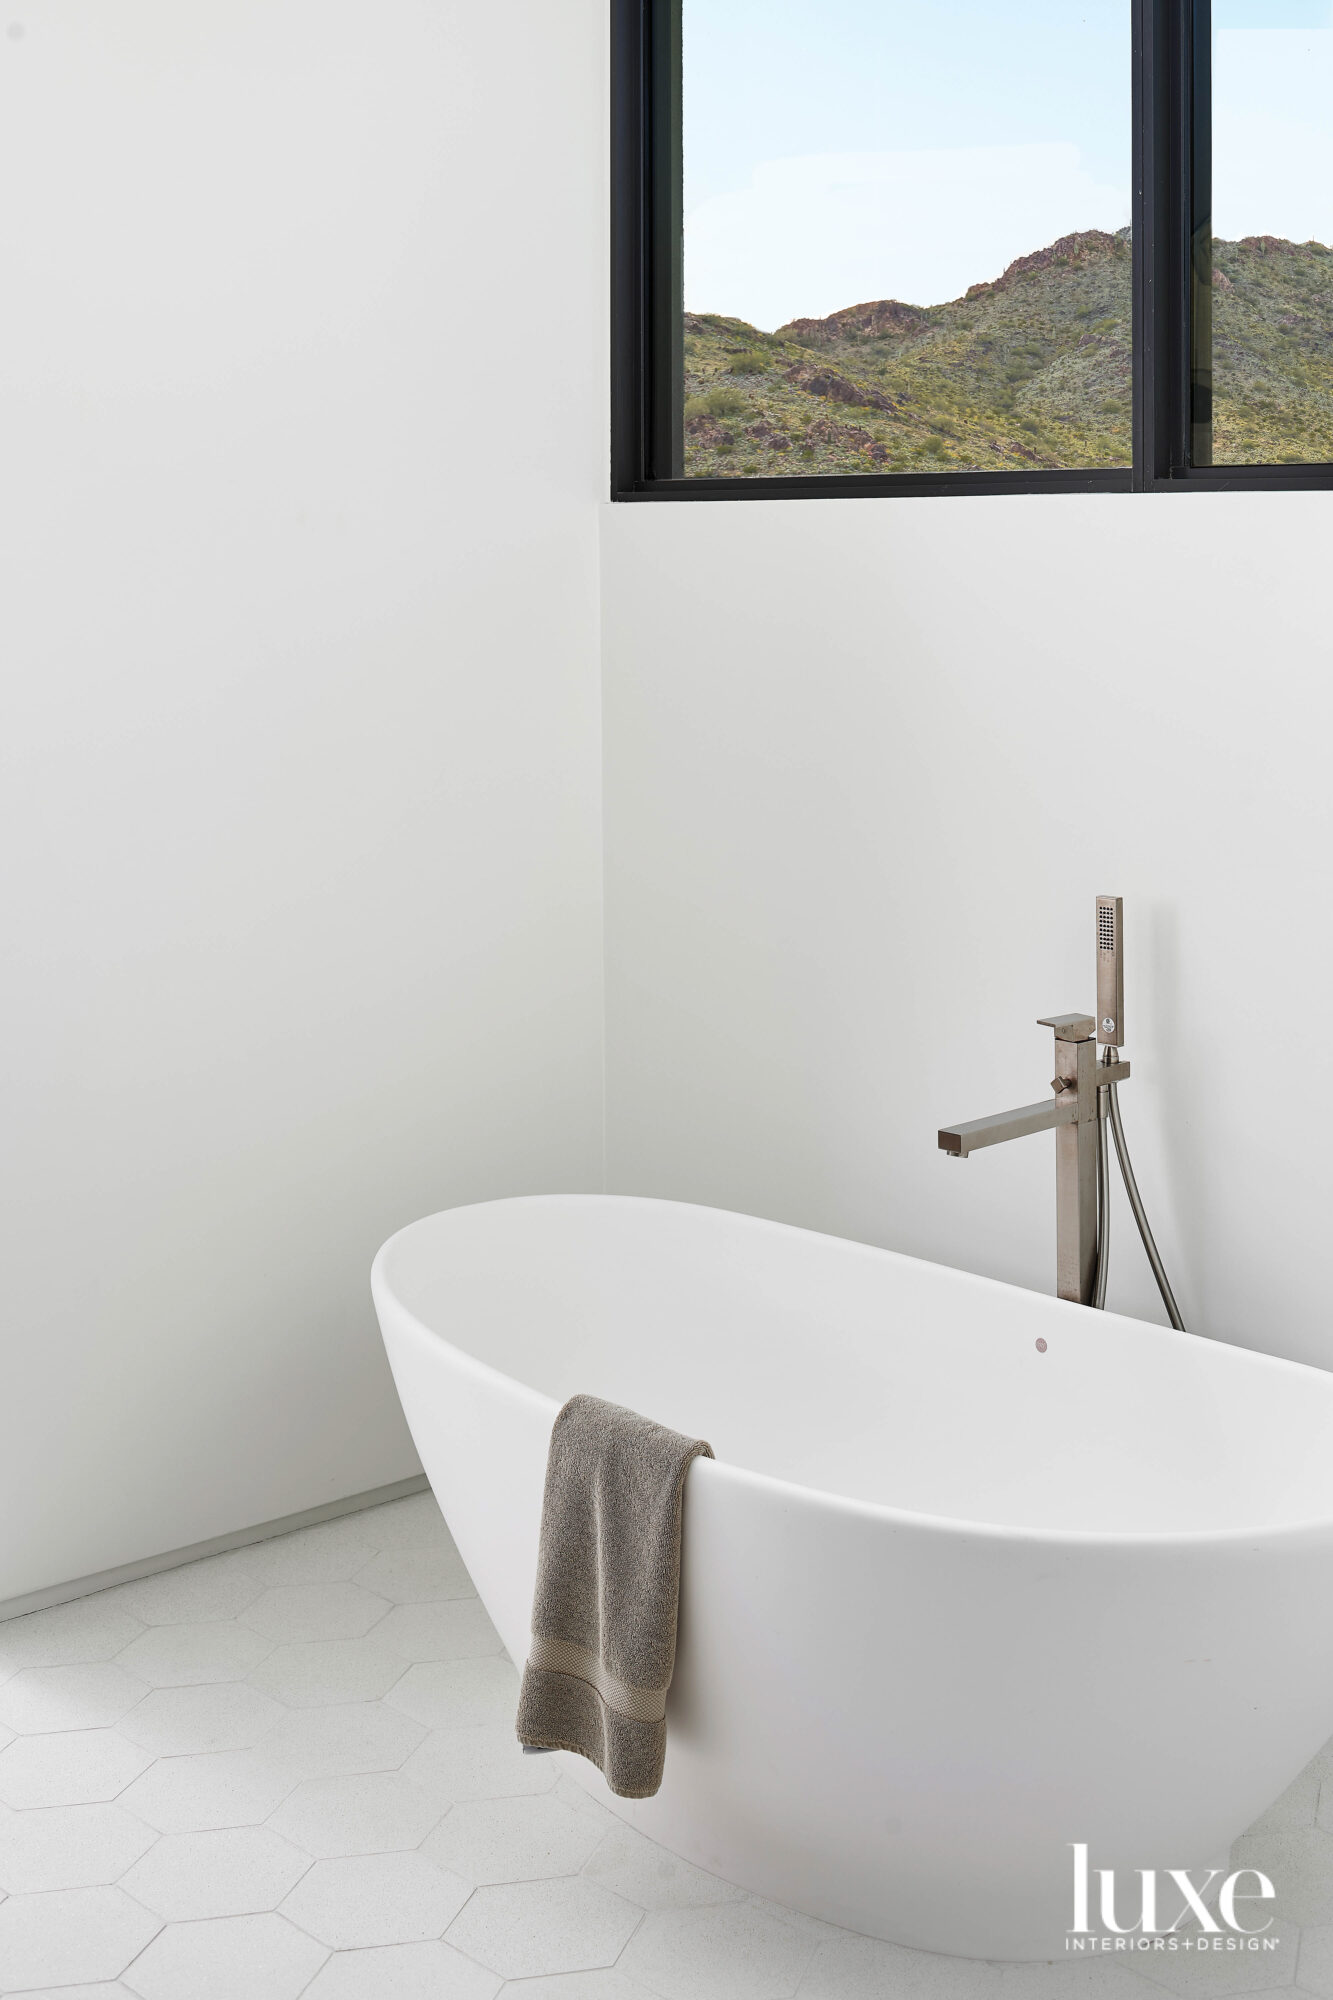 An all-white bathroom with a stand-alone tub and a window looking out at the mountains.